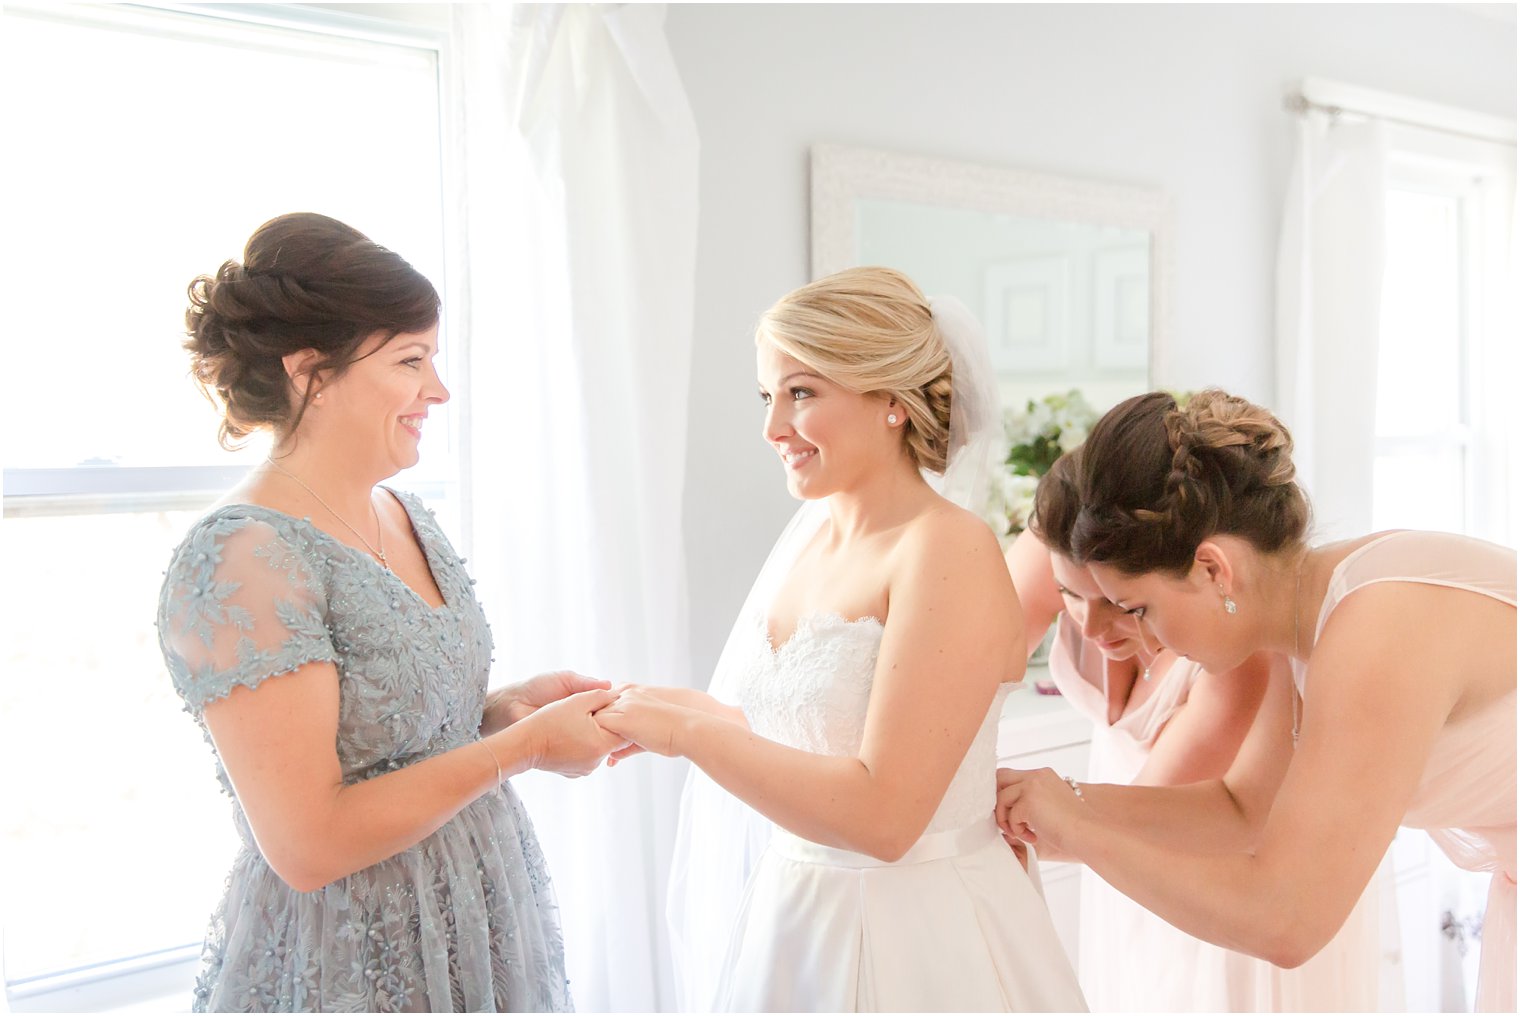 Bride getting ready with her mother and bridesmaids